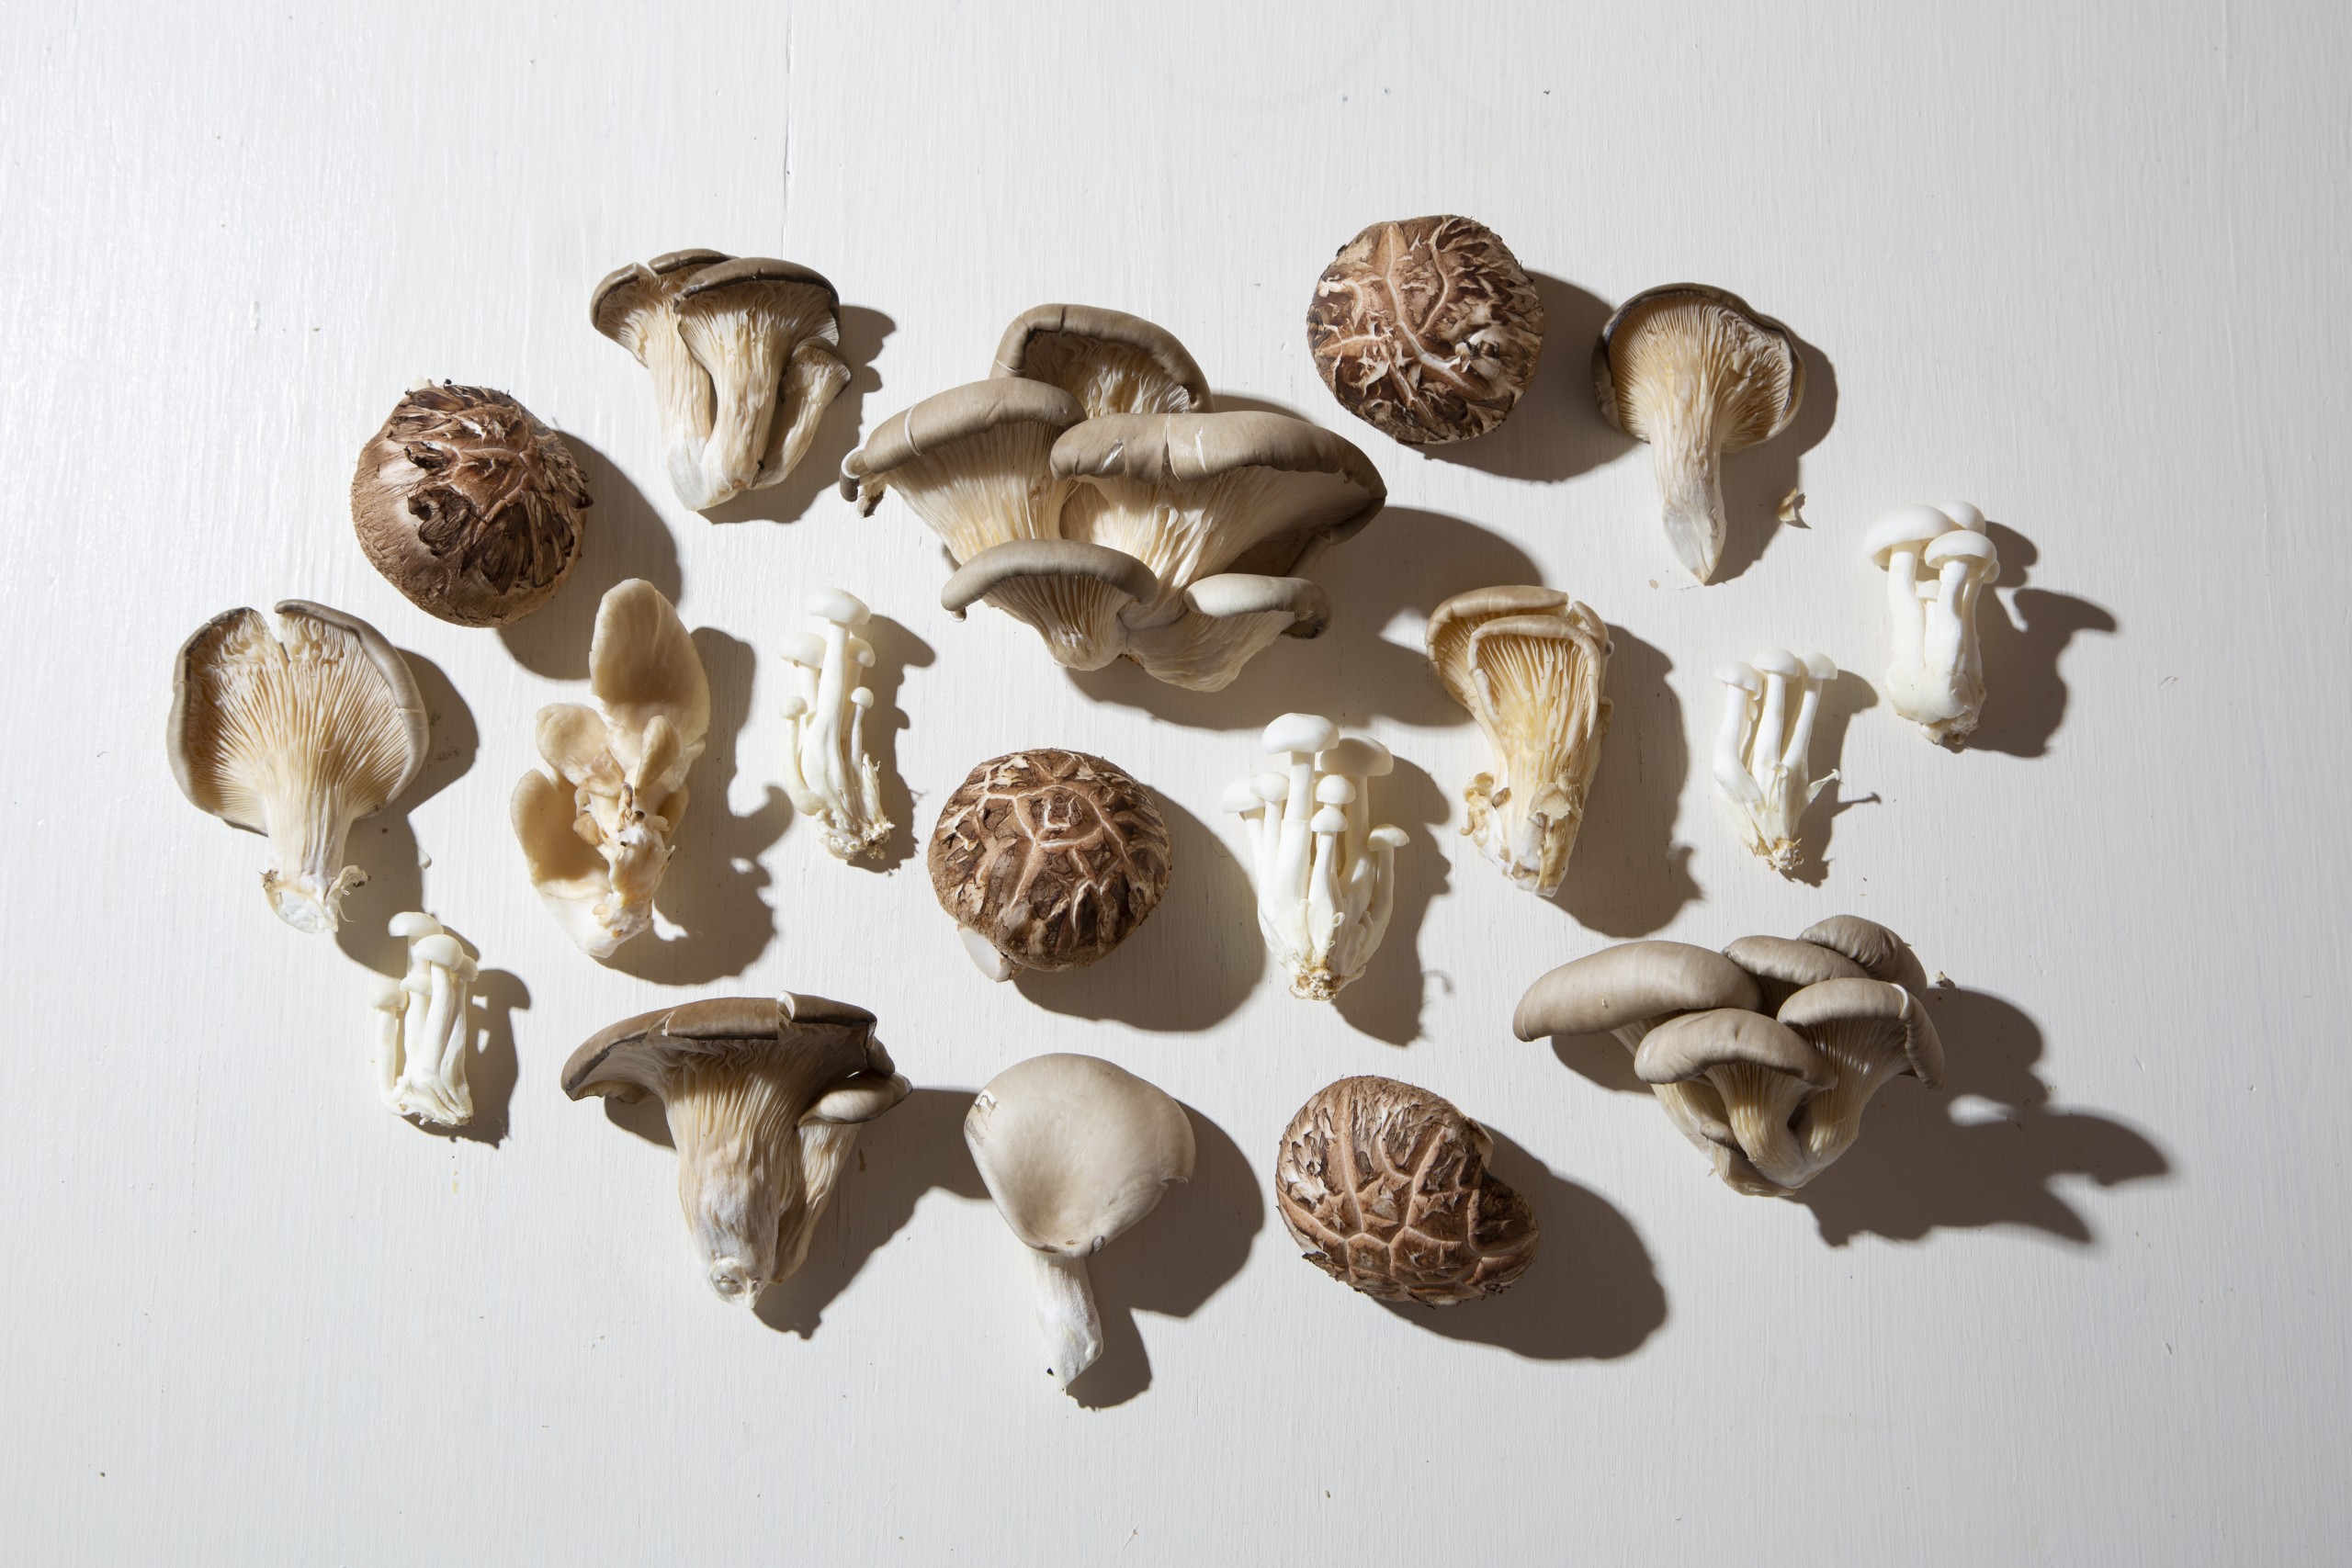 Are Mushrooms the Key to Our Future?